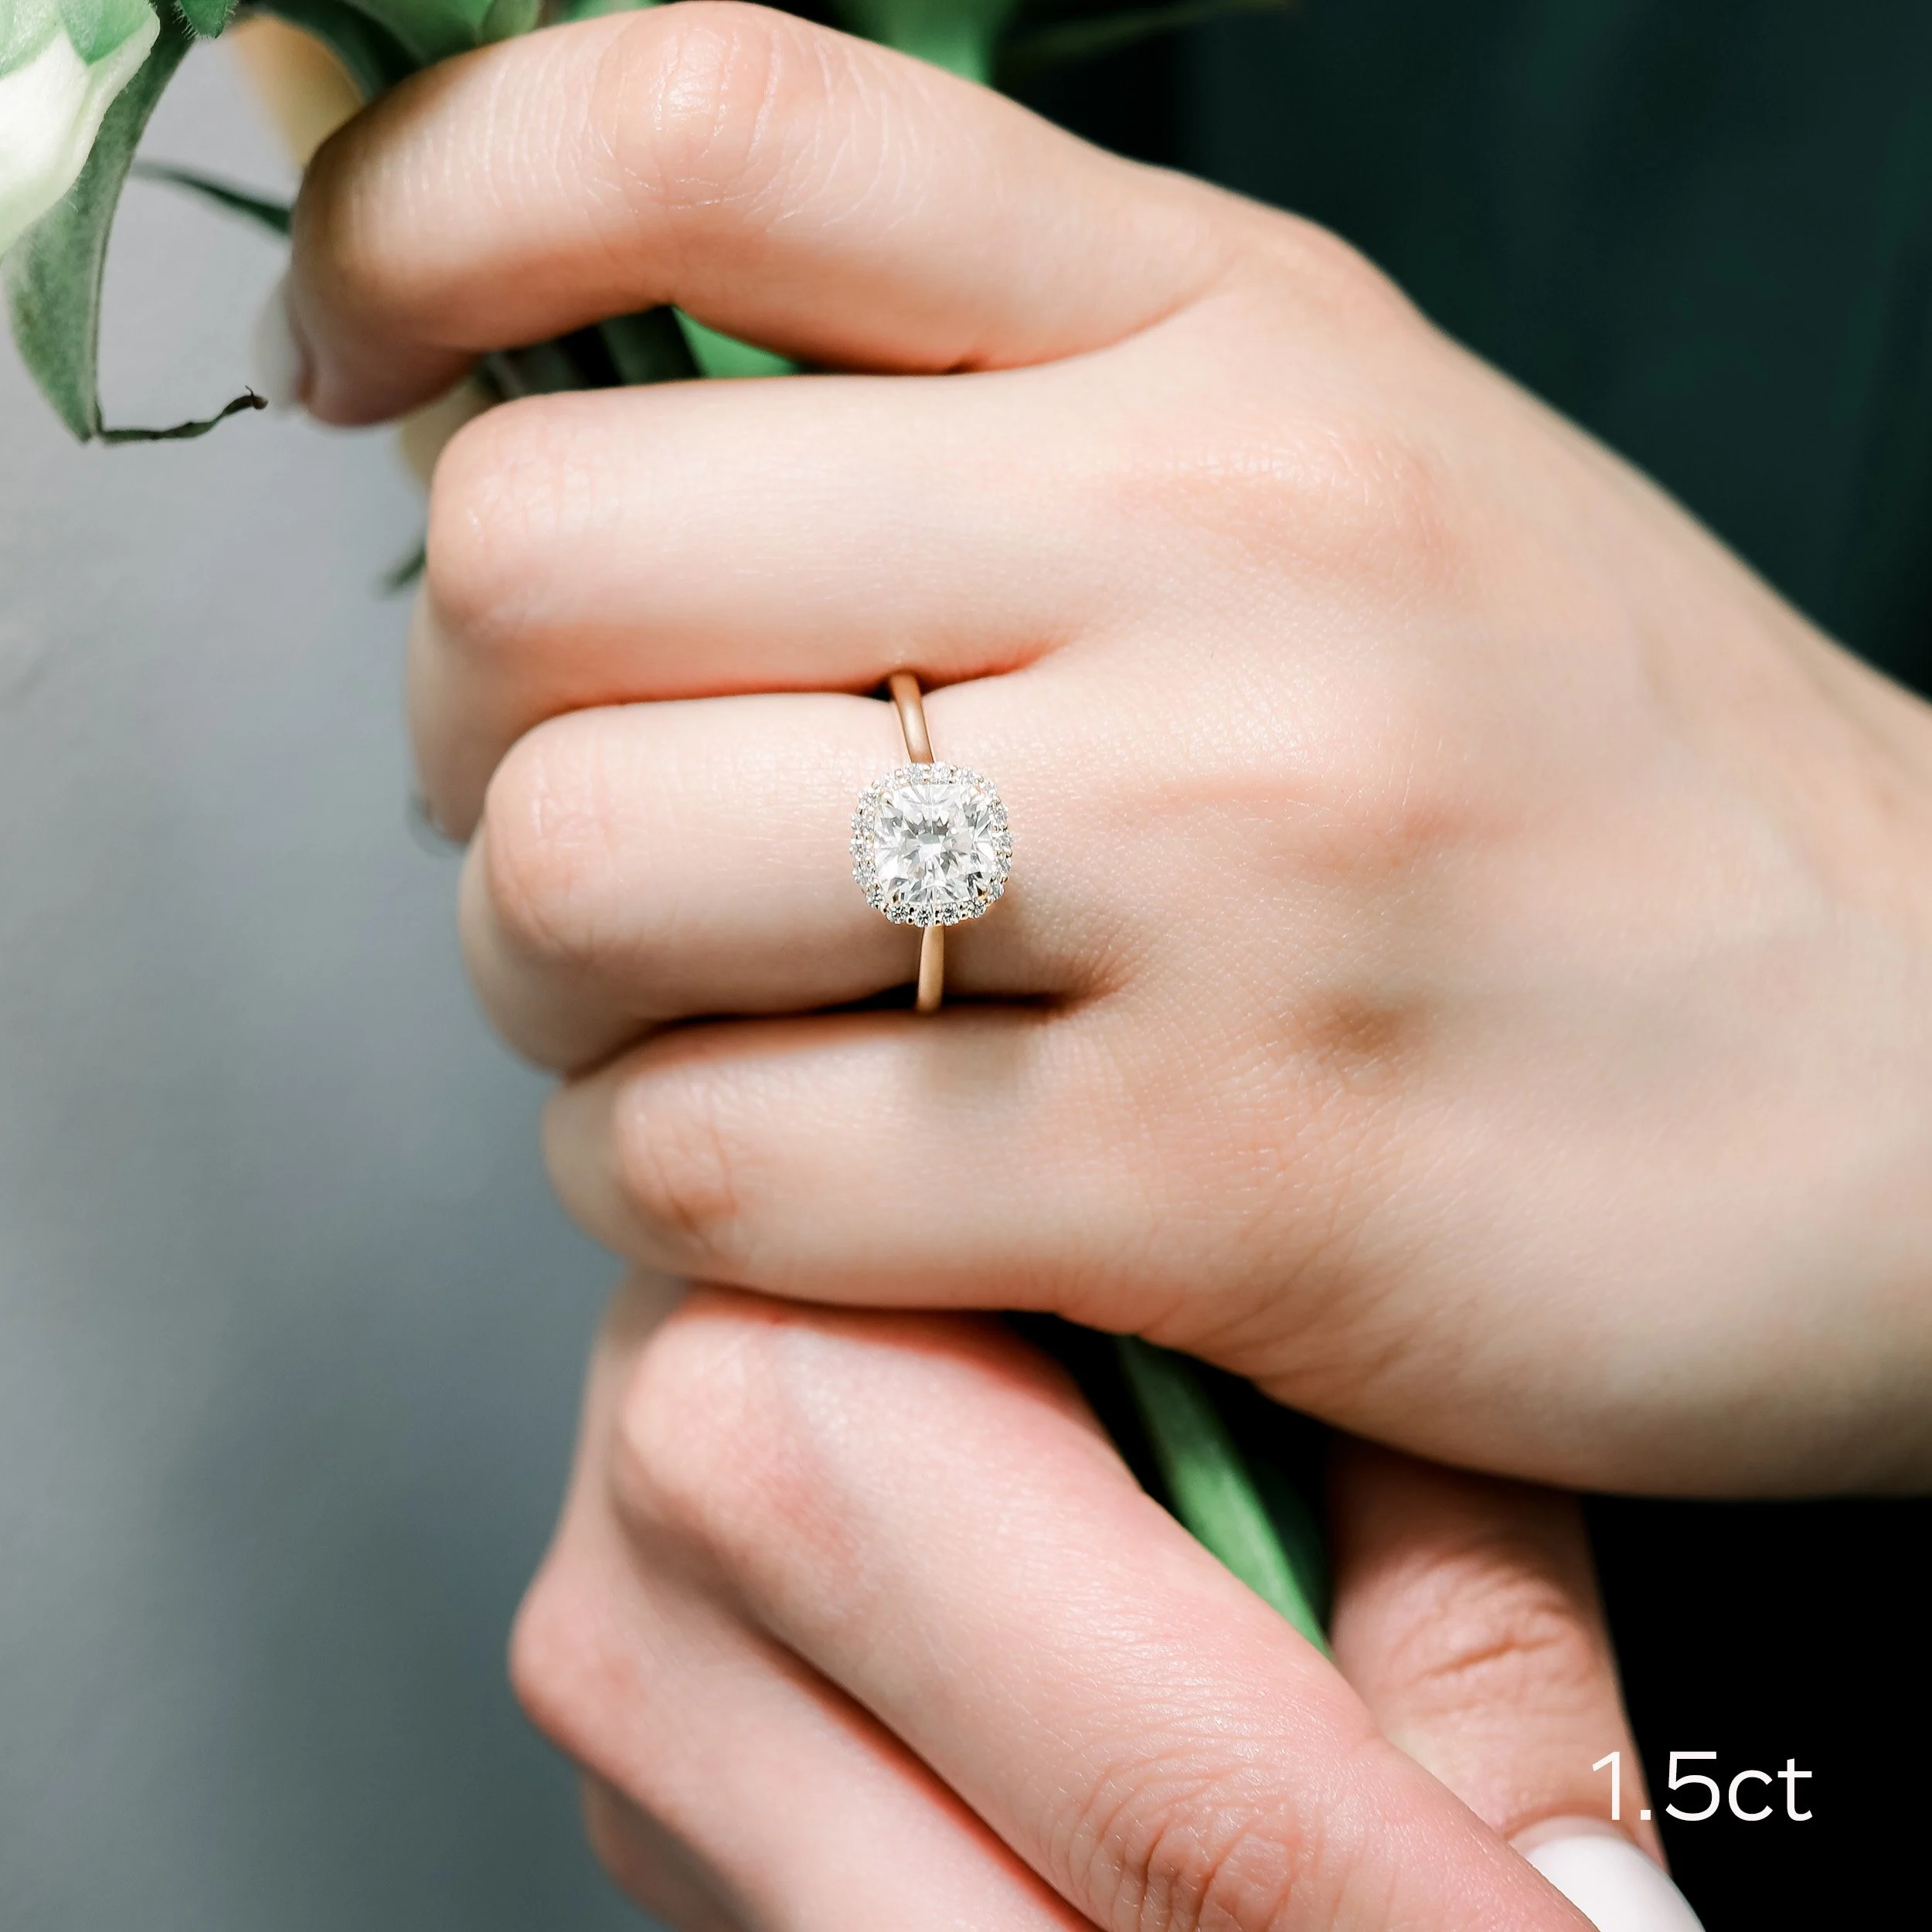 The Evergreen Solitaire Ring For Him - Create Your Own Ring - Solitaire  Jewellery | Classic engagement ring solitaire, Gold ring designs, Wedding rings  solitaire